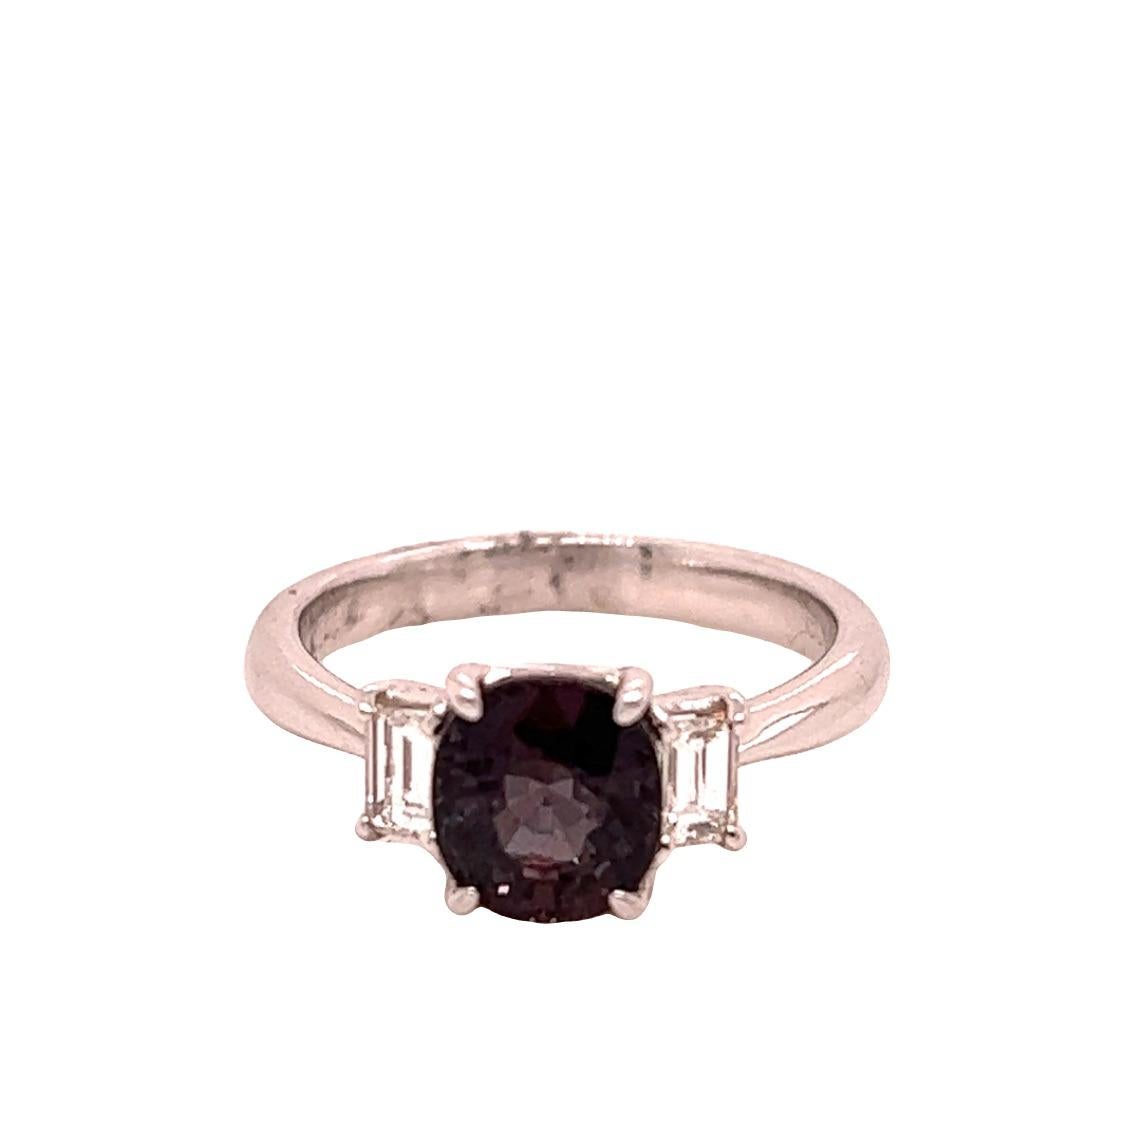 This is a gorgeous natural AAA quality oval Alexandrite set in a vintage platinum setting. This ring features a natural Brazilian 2.21 carat oval Alexandrite that is certified by the Gemological Institute of America (GIA). The ring is a true